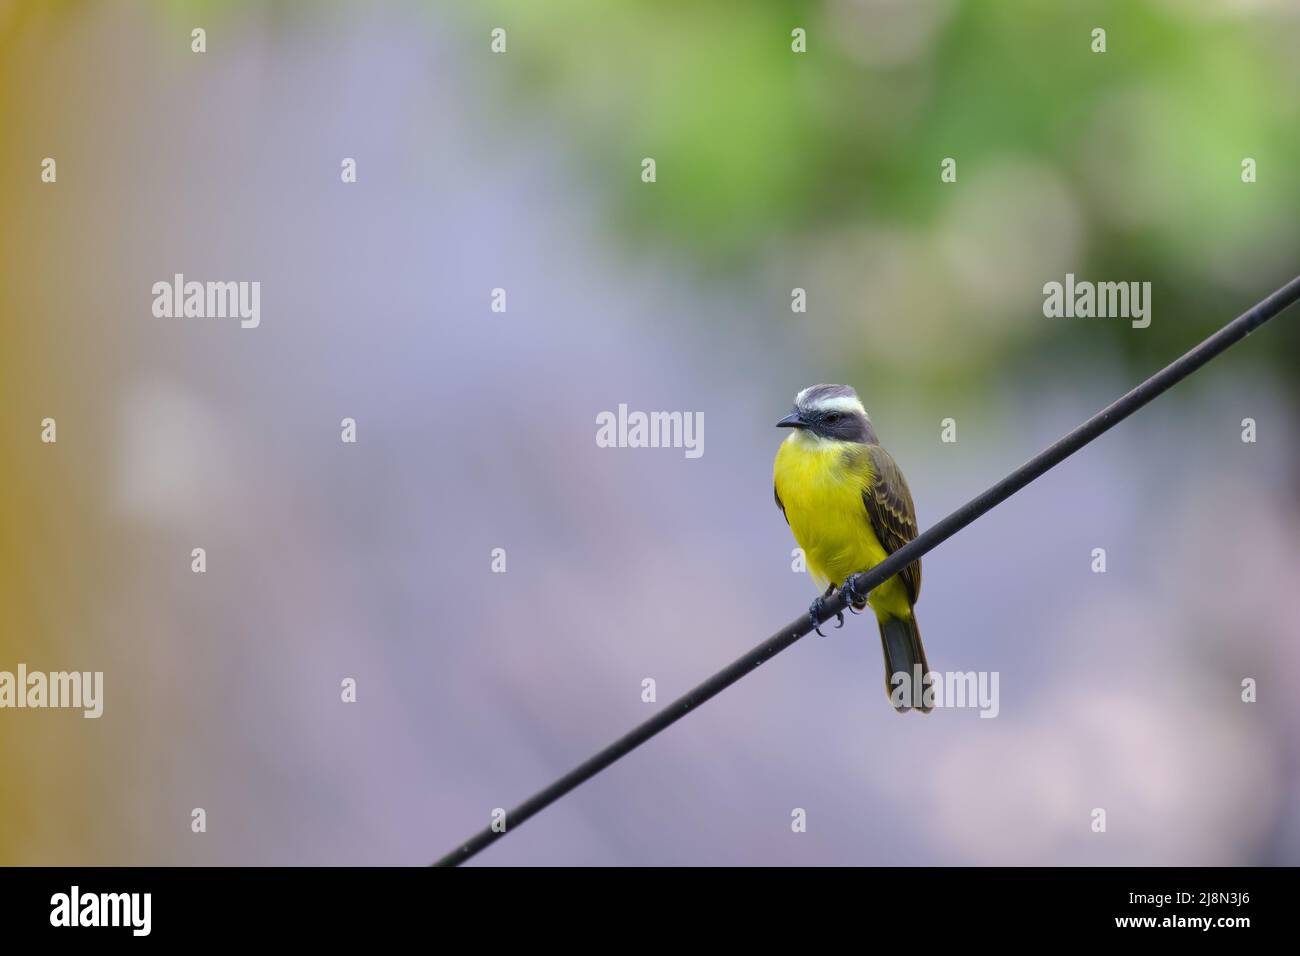 Social Flycatcher (Myiozetetes similis), perched on the dry branches of an old bush in the jungle. Stock Photo